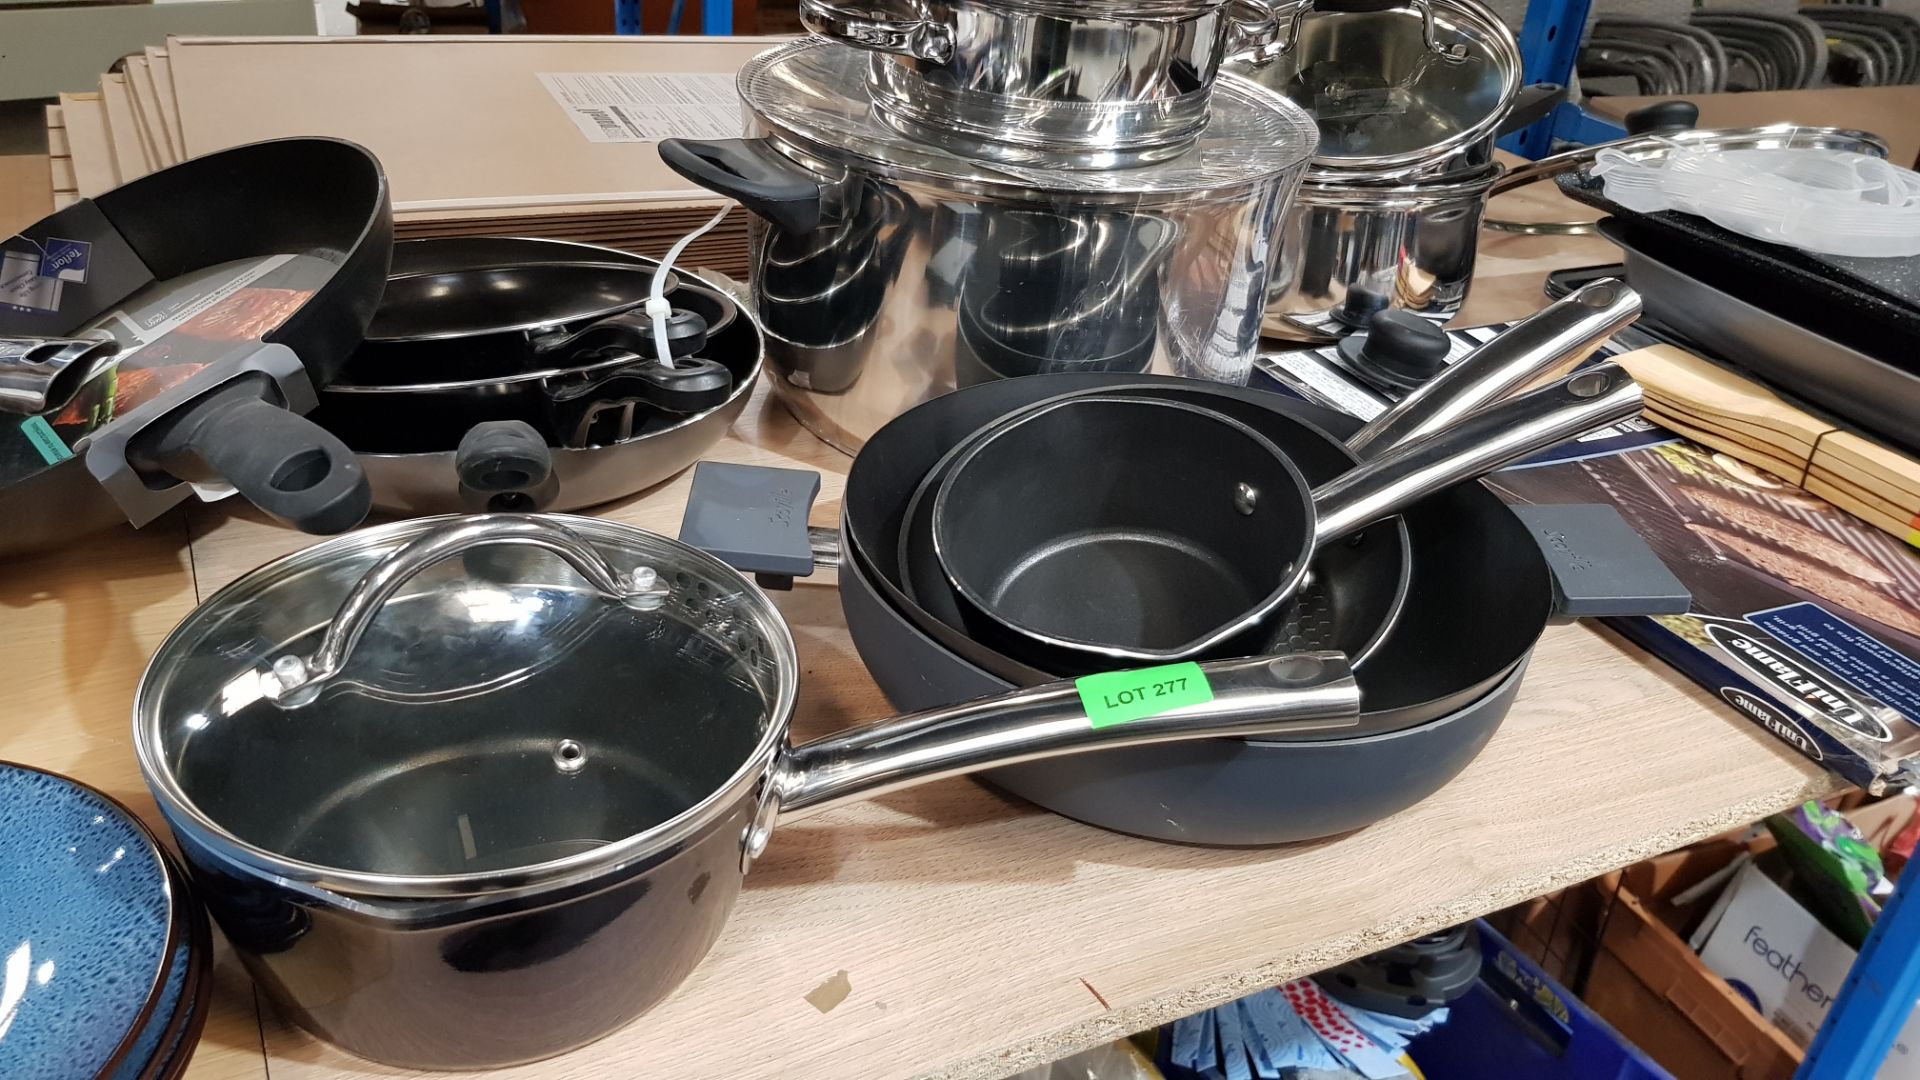 (R3D) Household. Contents Of Shelf. Mixed Lot To Include Frying Pans, Saucepans, 3 Tier Steamers, D